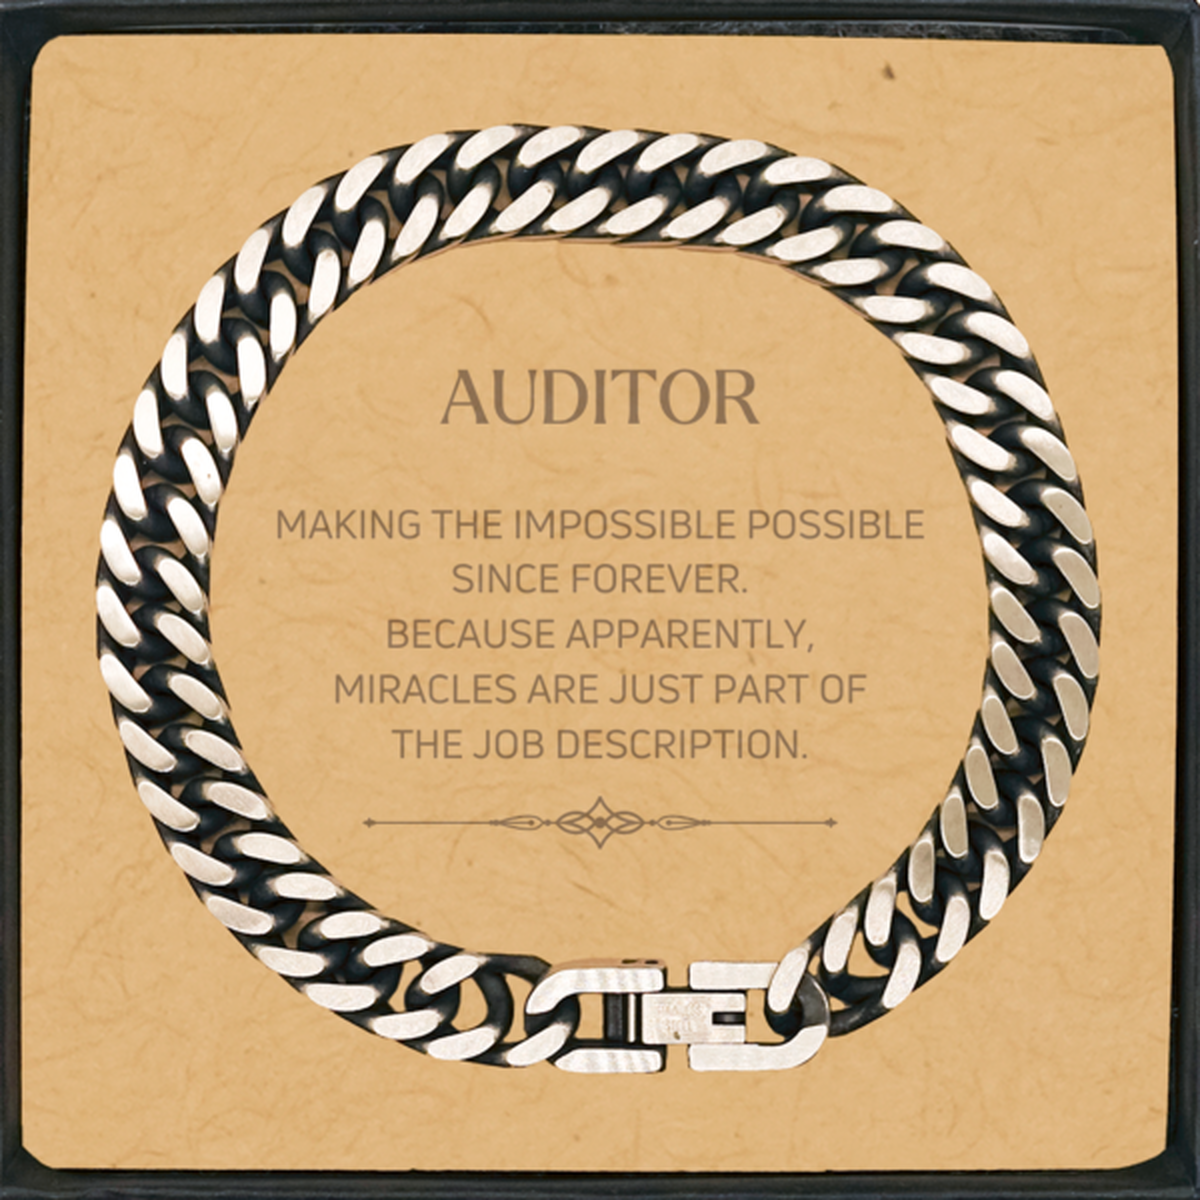 Funny Auditor Gifts, Miracles are just part of the job description, Inspirational Birthday Cuban Link Chain Bracelet For Auditor, Men, Women, Coworkers, Friends, Boss